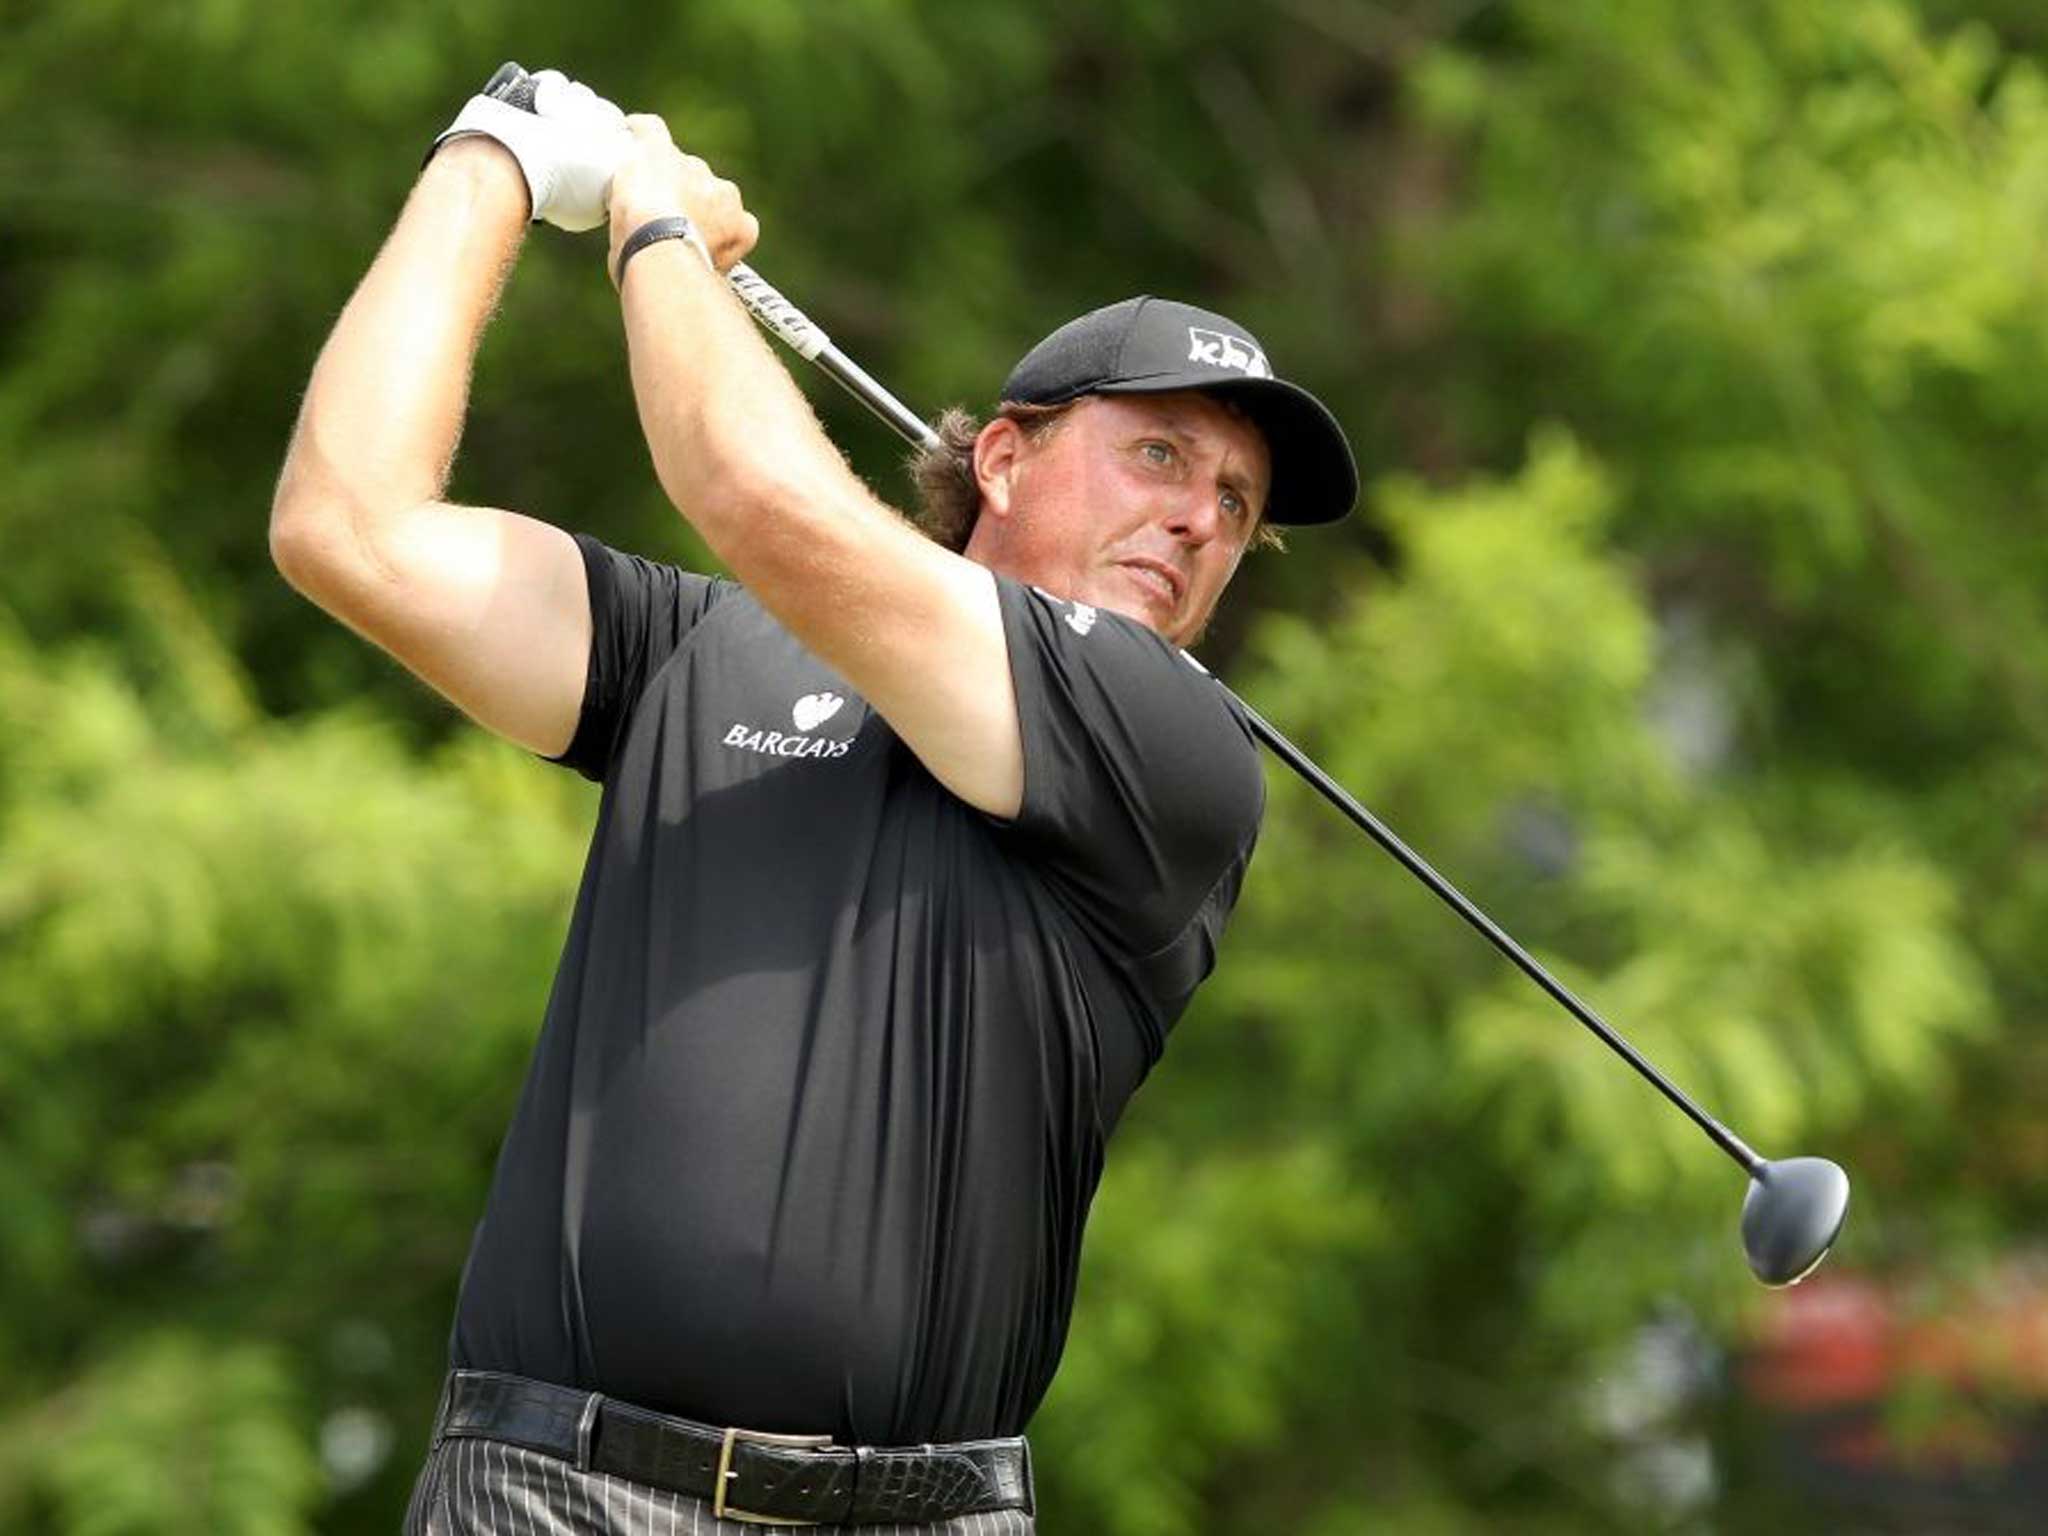 In the swing: Phil Mickelson appears in better form at the St Jude Classic as he builds up for the US Open